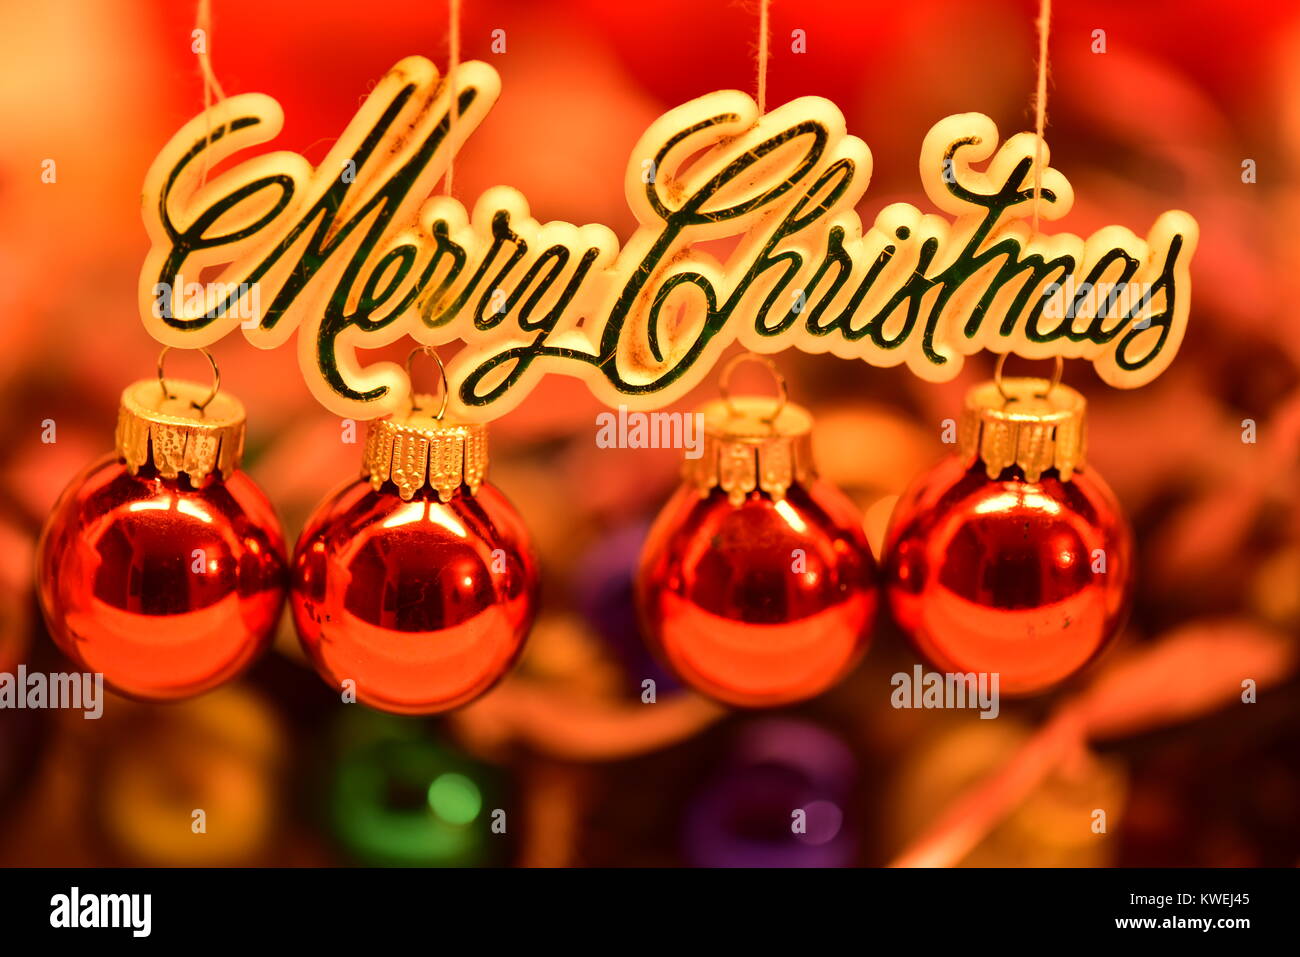 Merry Christmas 2018 Card with Bokeh and Texts Composition Stock Photo